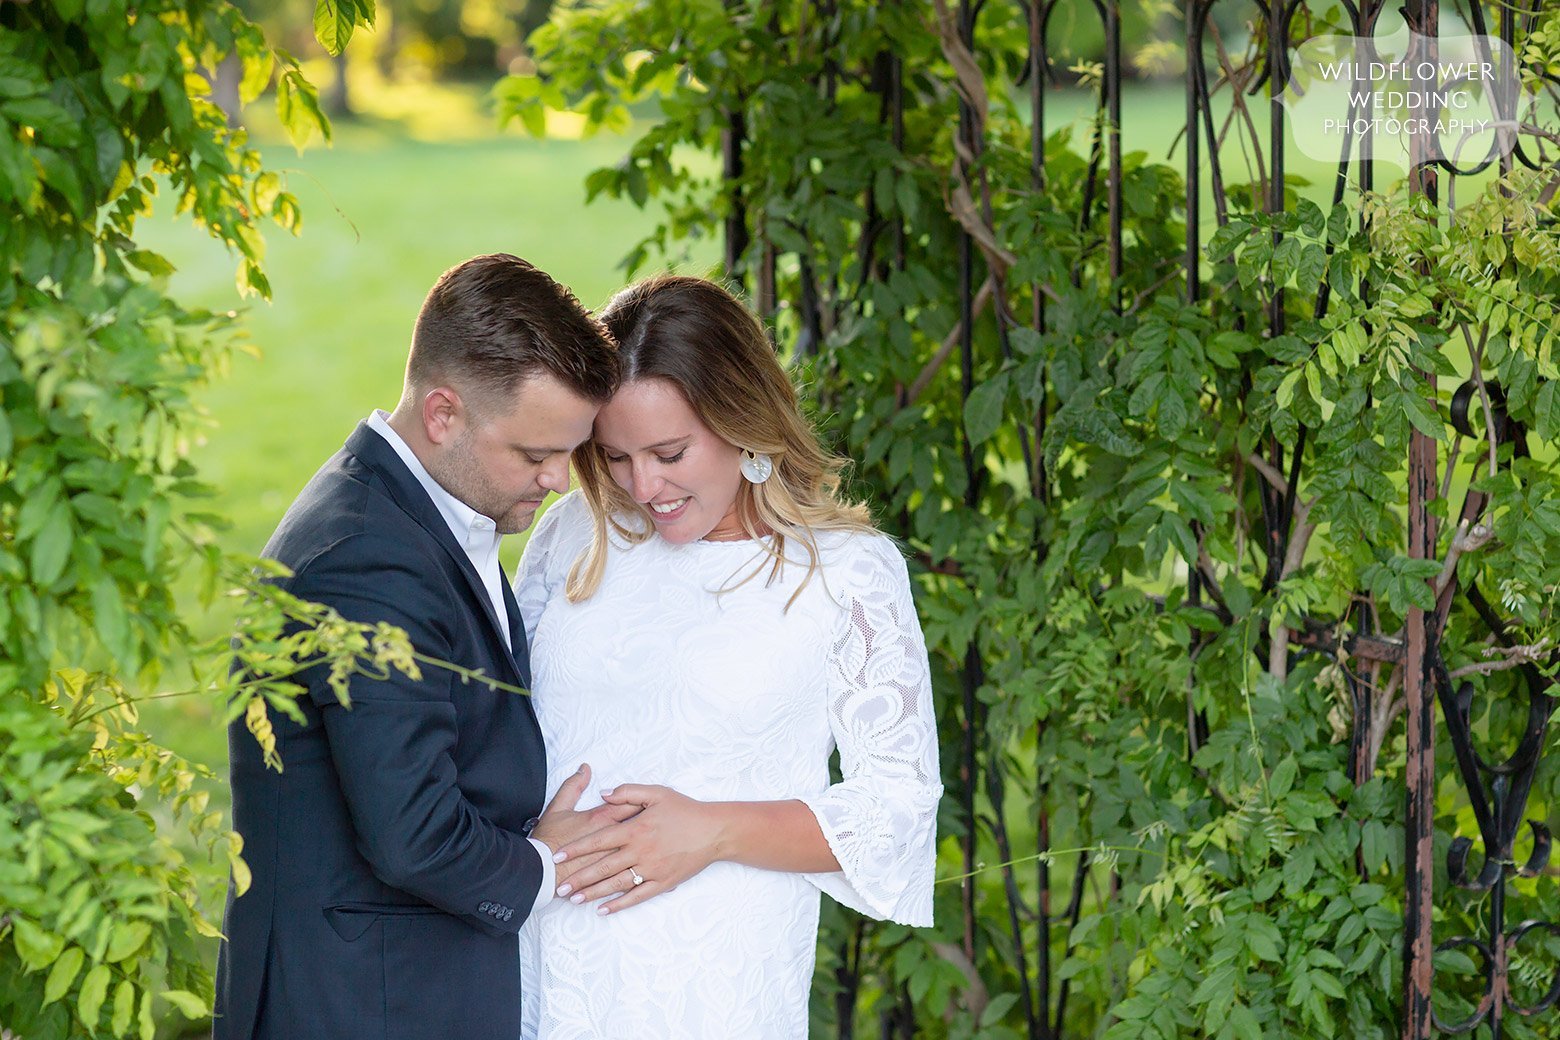 Outdoor maternity photographer in Columbia, MO.